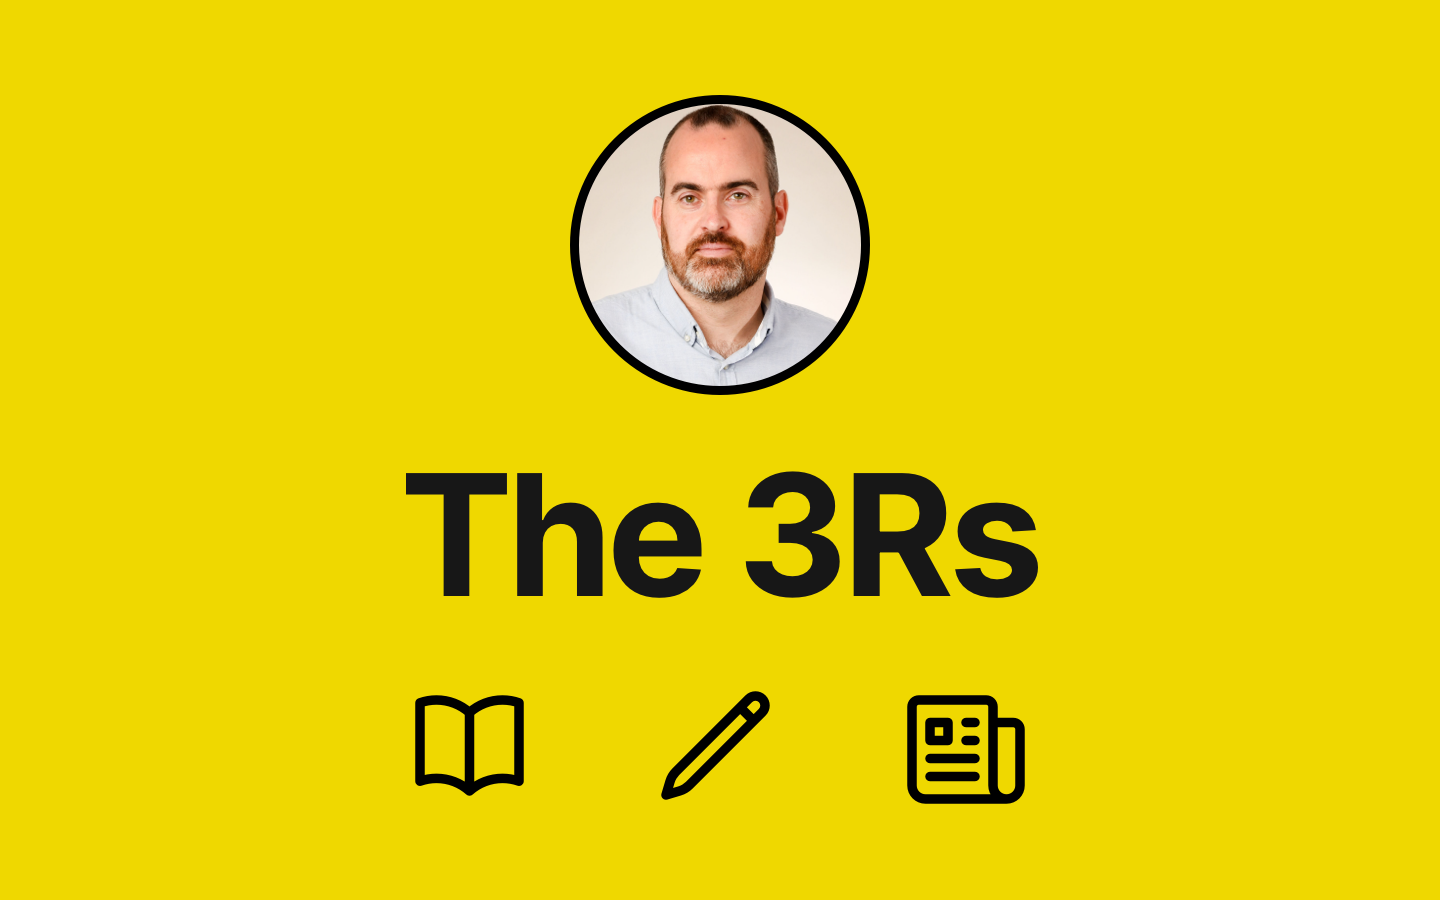 The 3Rs: What I'm reading, (w)riting, & research I'm interested in - Issue #2 feature image